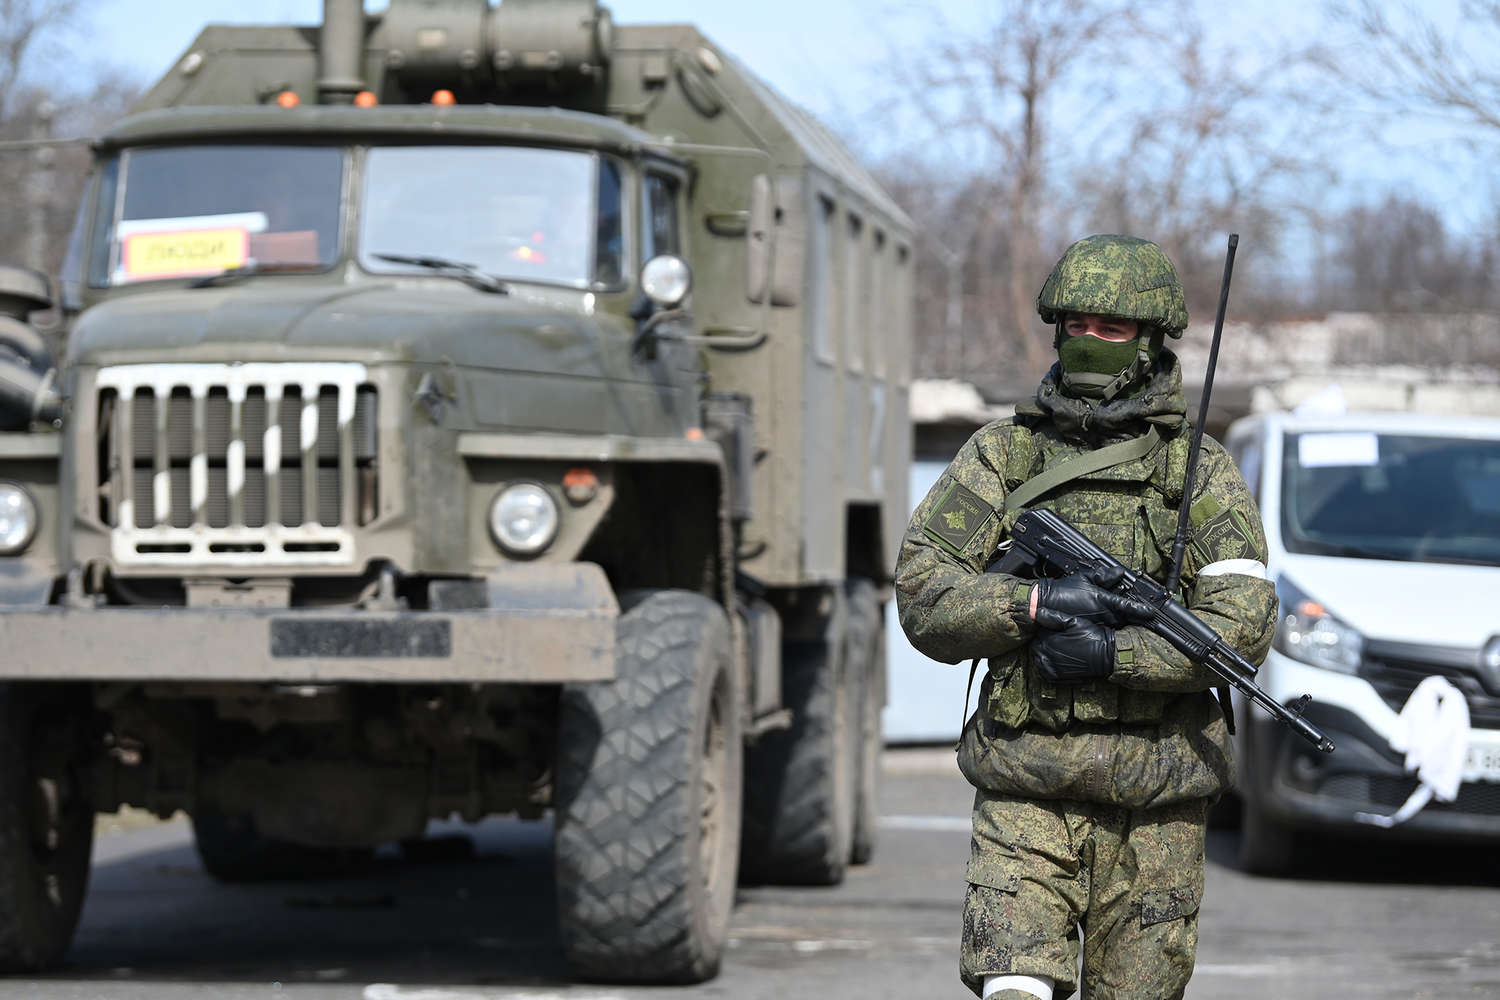 Russian Armed Forces soldier in Mariupol, March 2022